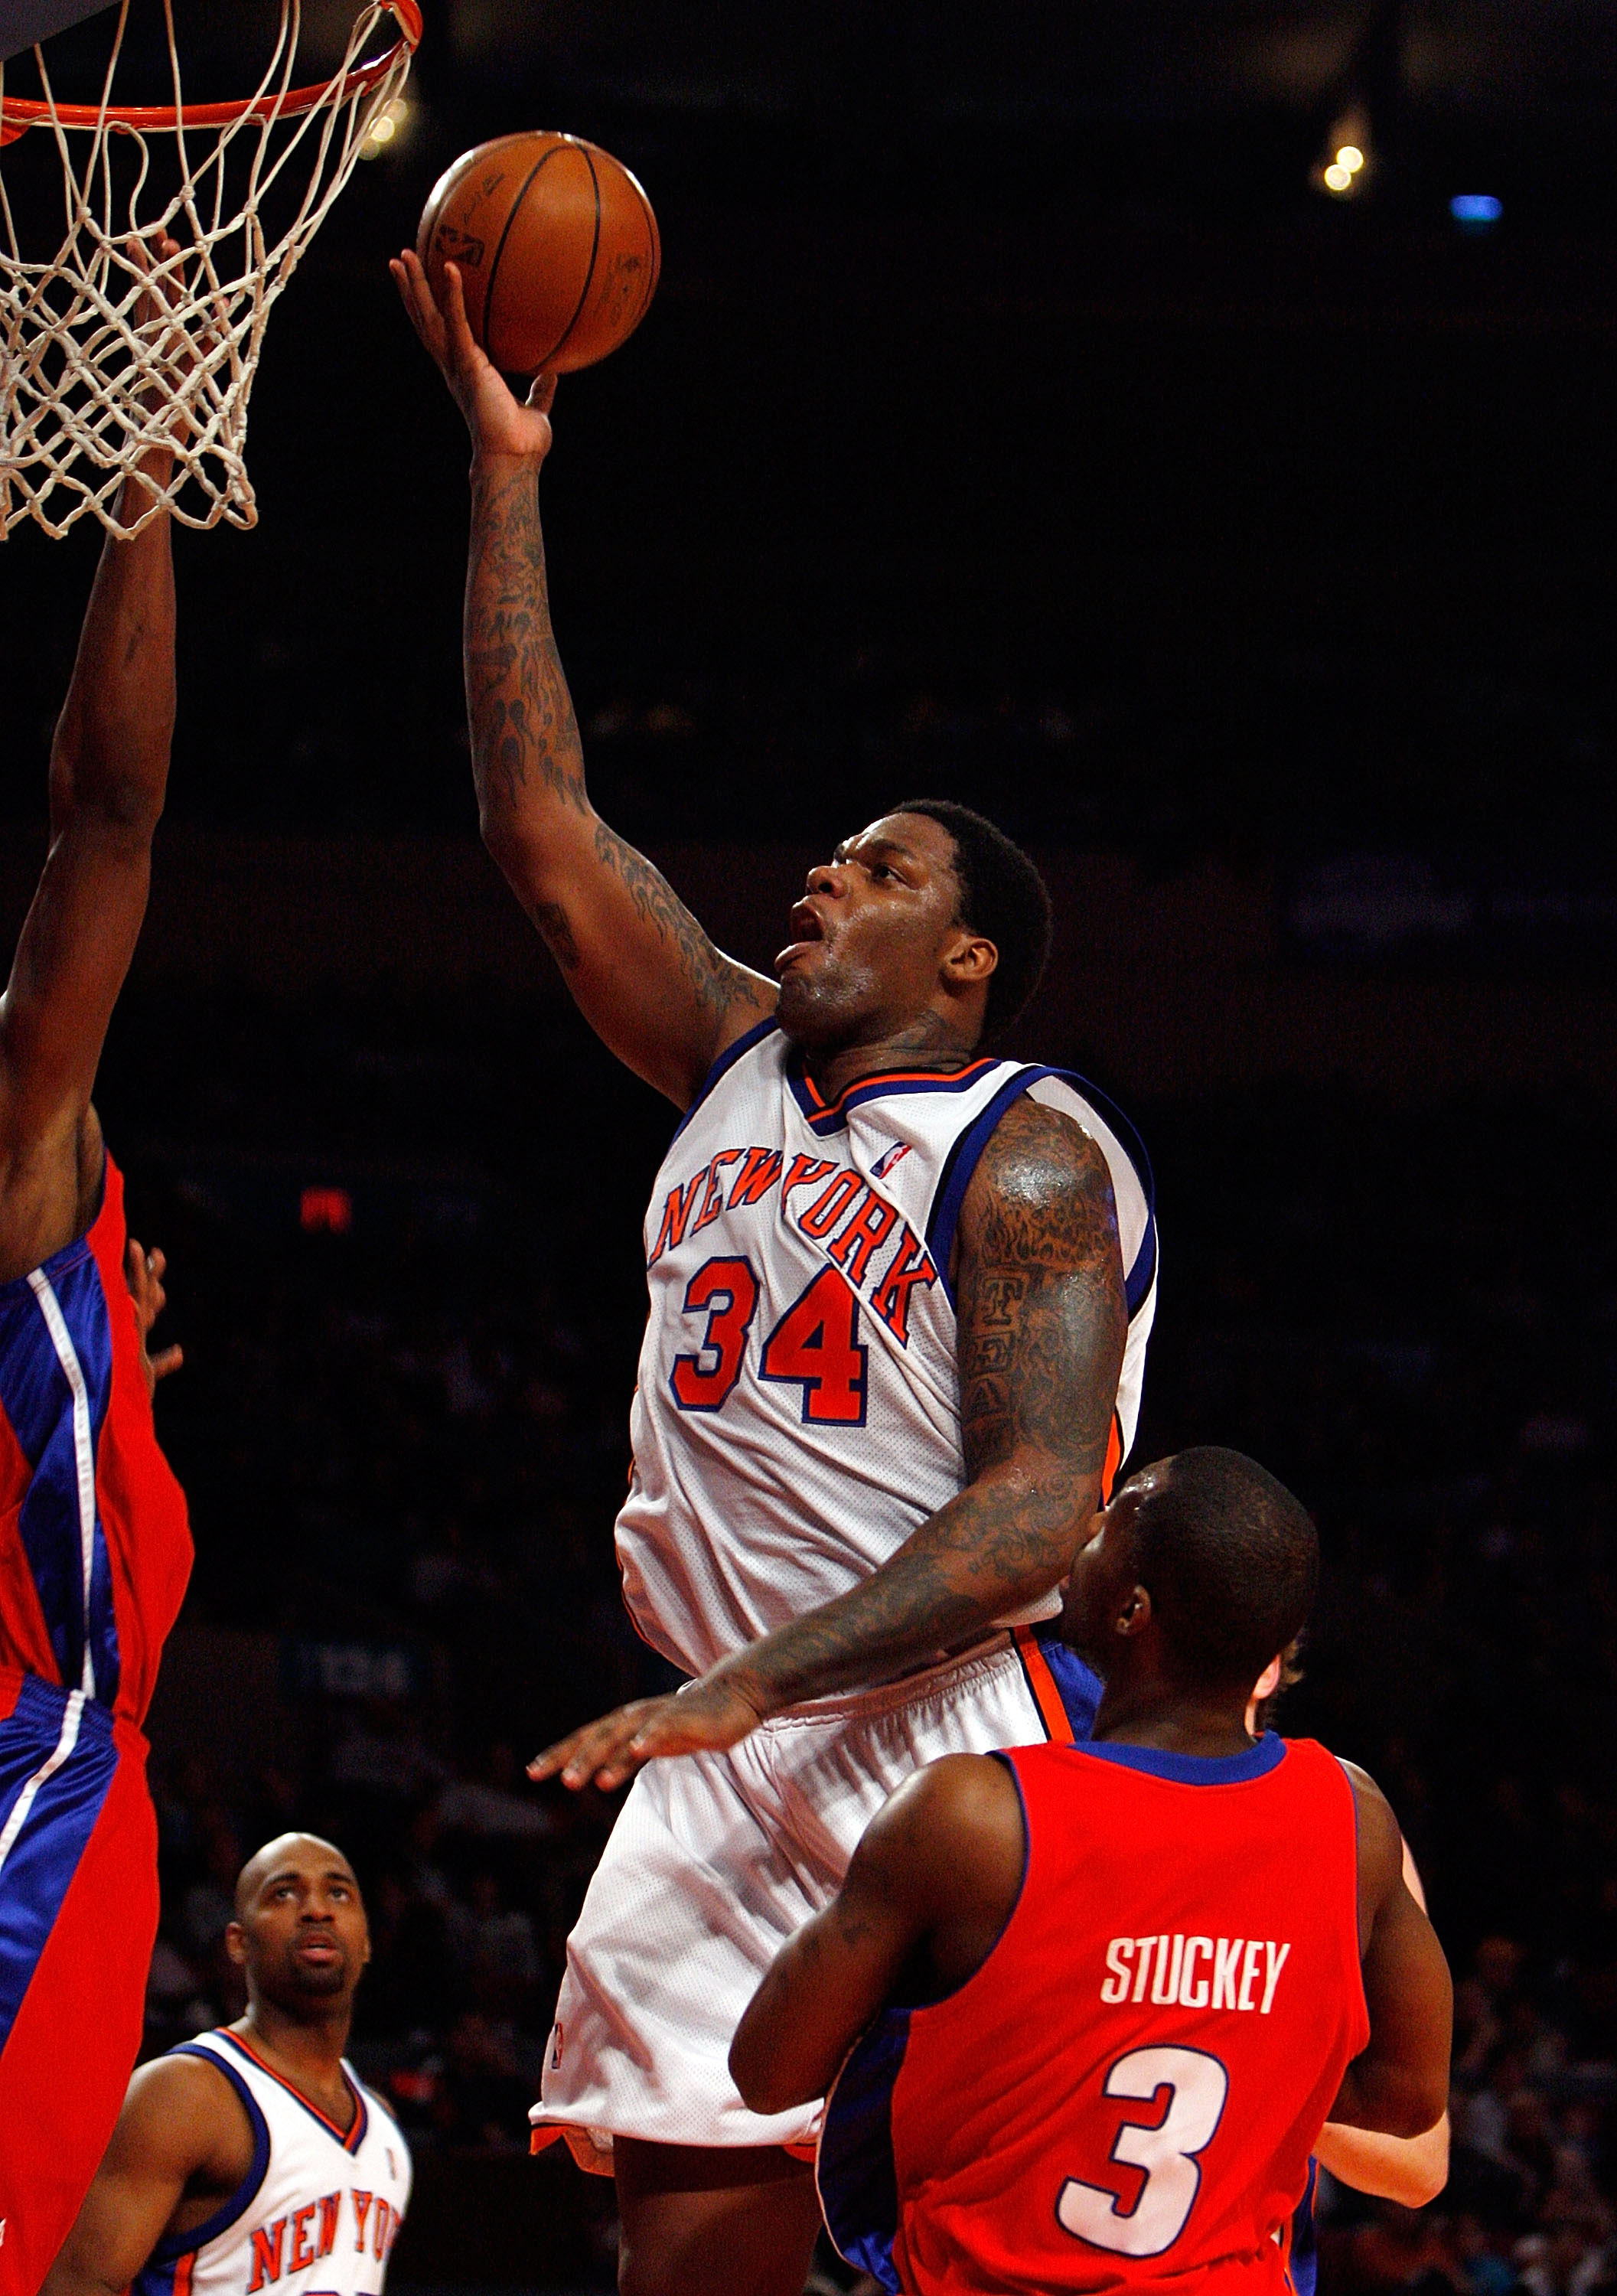 NEW YORK - MARCH 07: Eddy Curry #34 of the New York Knicks lays the ball up against the Detroit Pistons on March 7, 2008 at Madison Square Garden in New York City. NOTE TO USER: User expressly acknowledges and agrees that, by downloading and/or using this